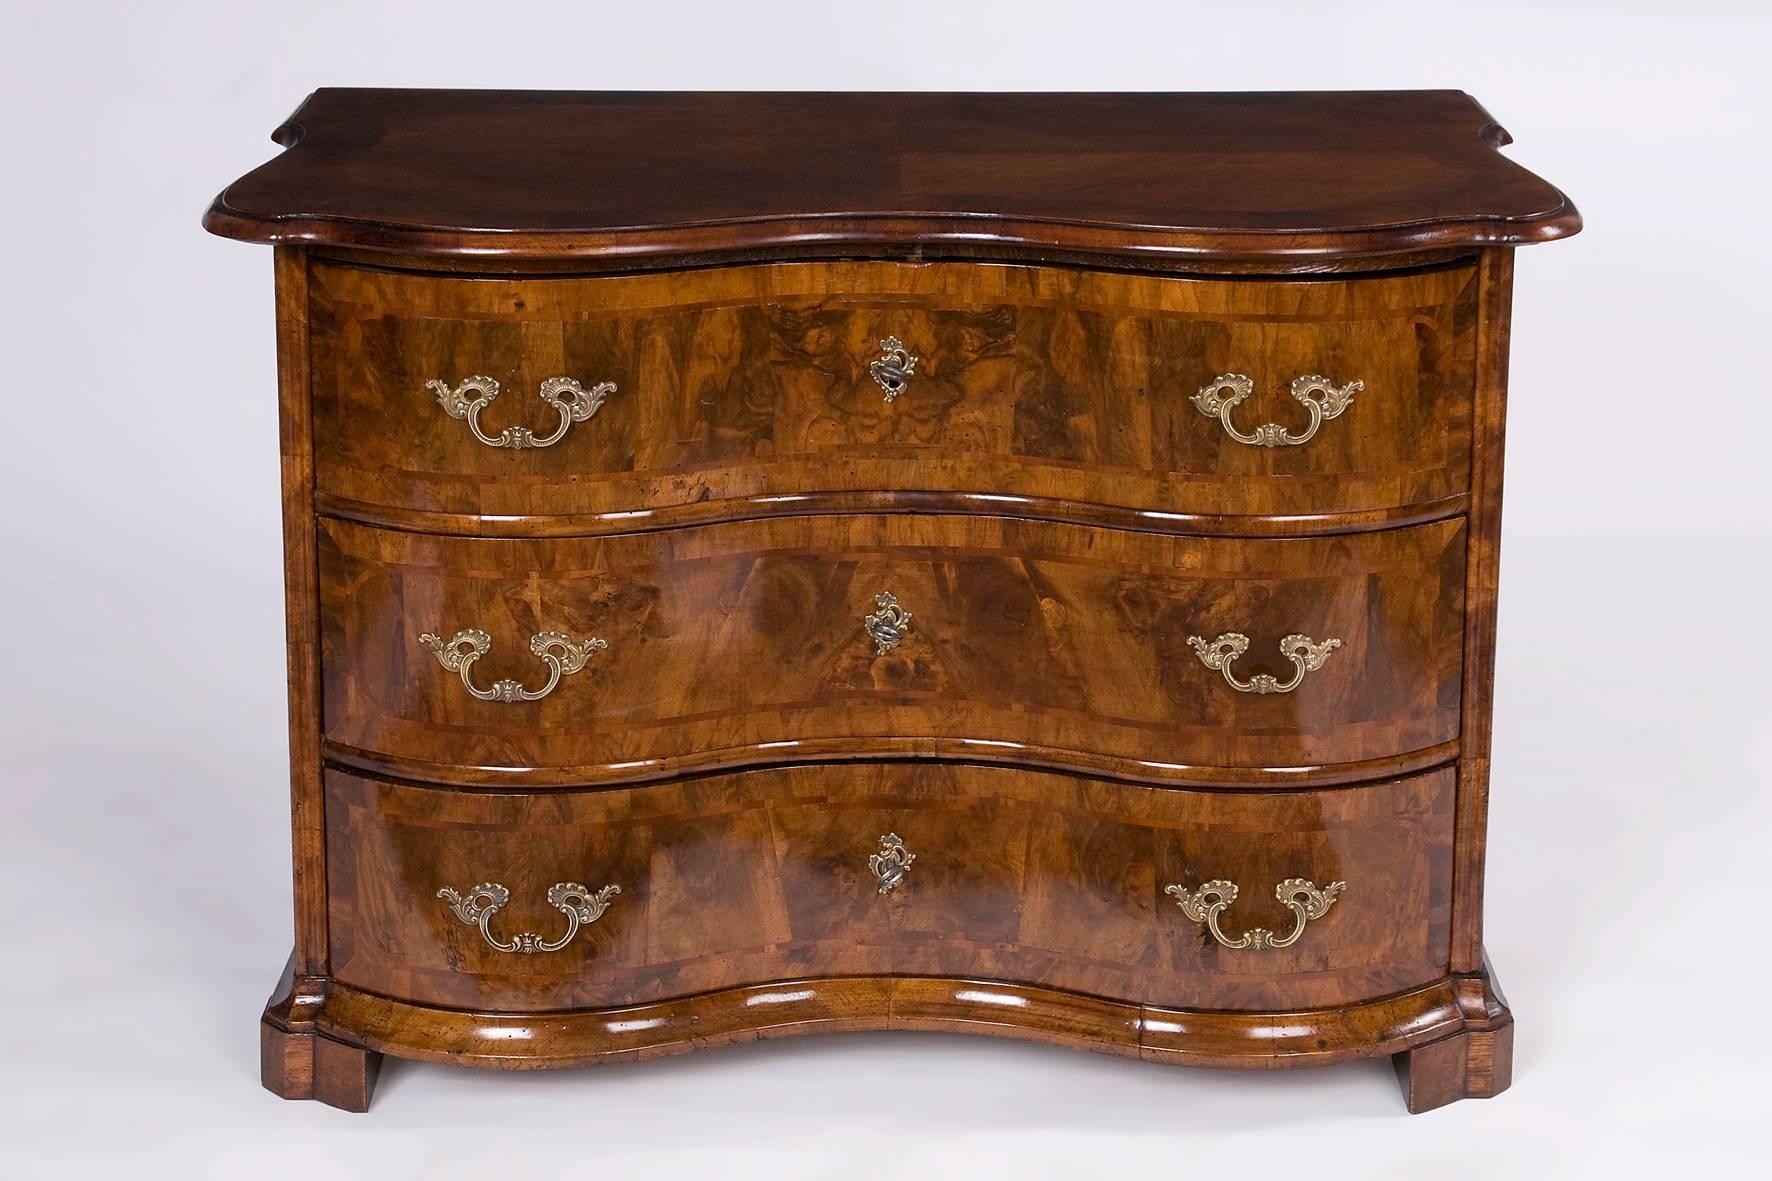 A walnut wood Baroque commode from the Hessian state of Germany. A three-parted dresser with a wonderfully curved front. It is made of walnut wood and walnut-grain with a mirrored veneer on the cover plate. The locks are originals but the fittings,